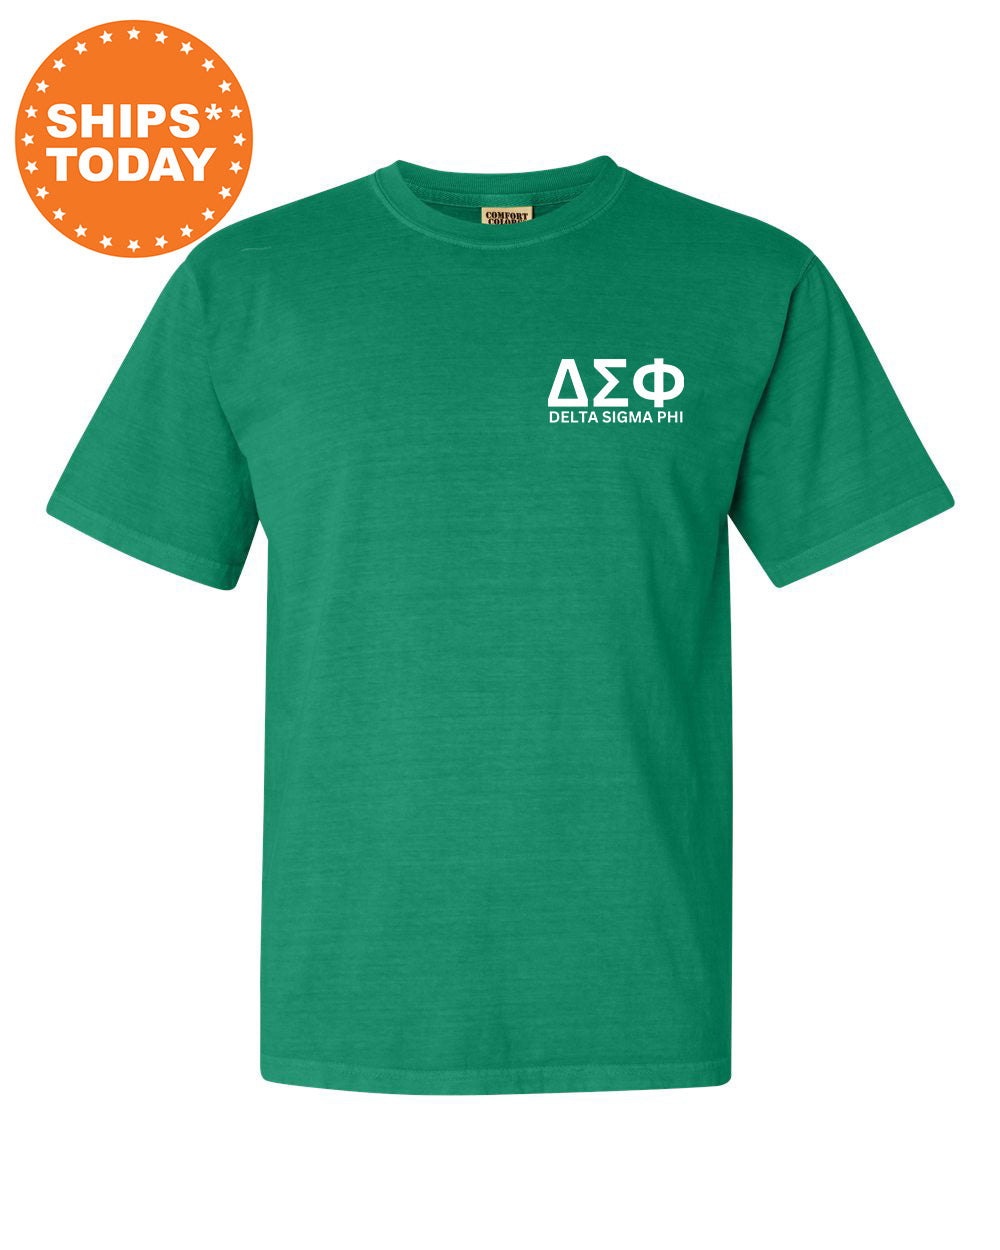 a green t - shirt with a white logo on it